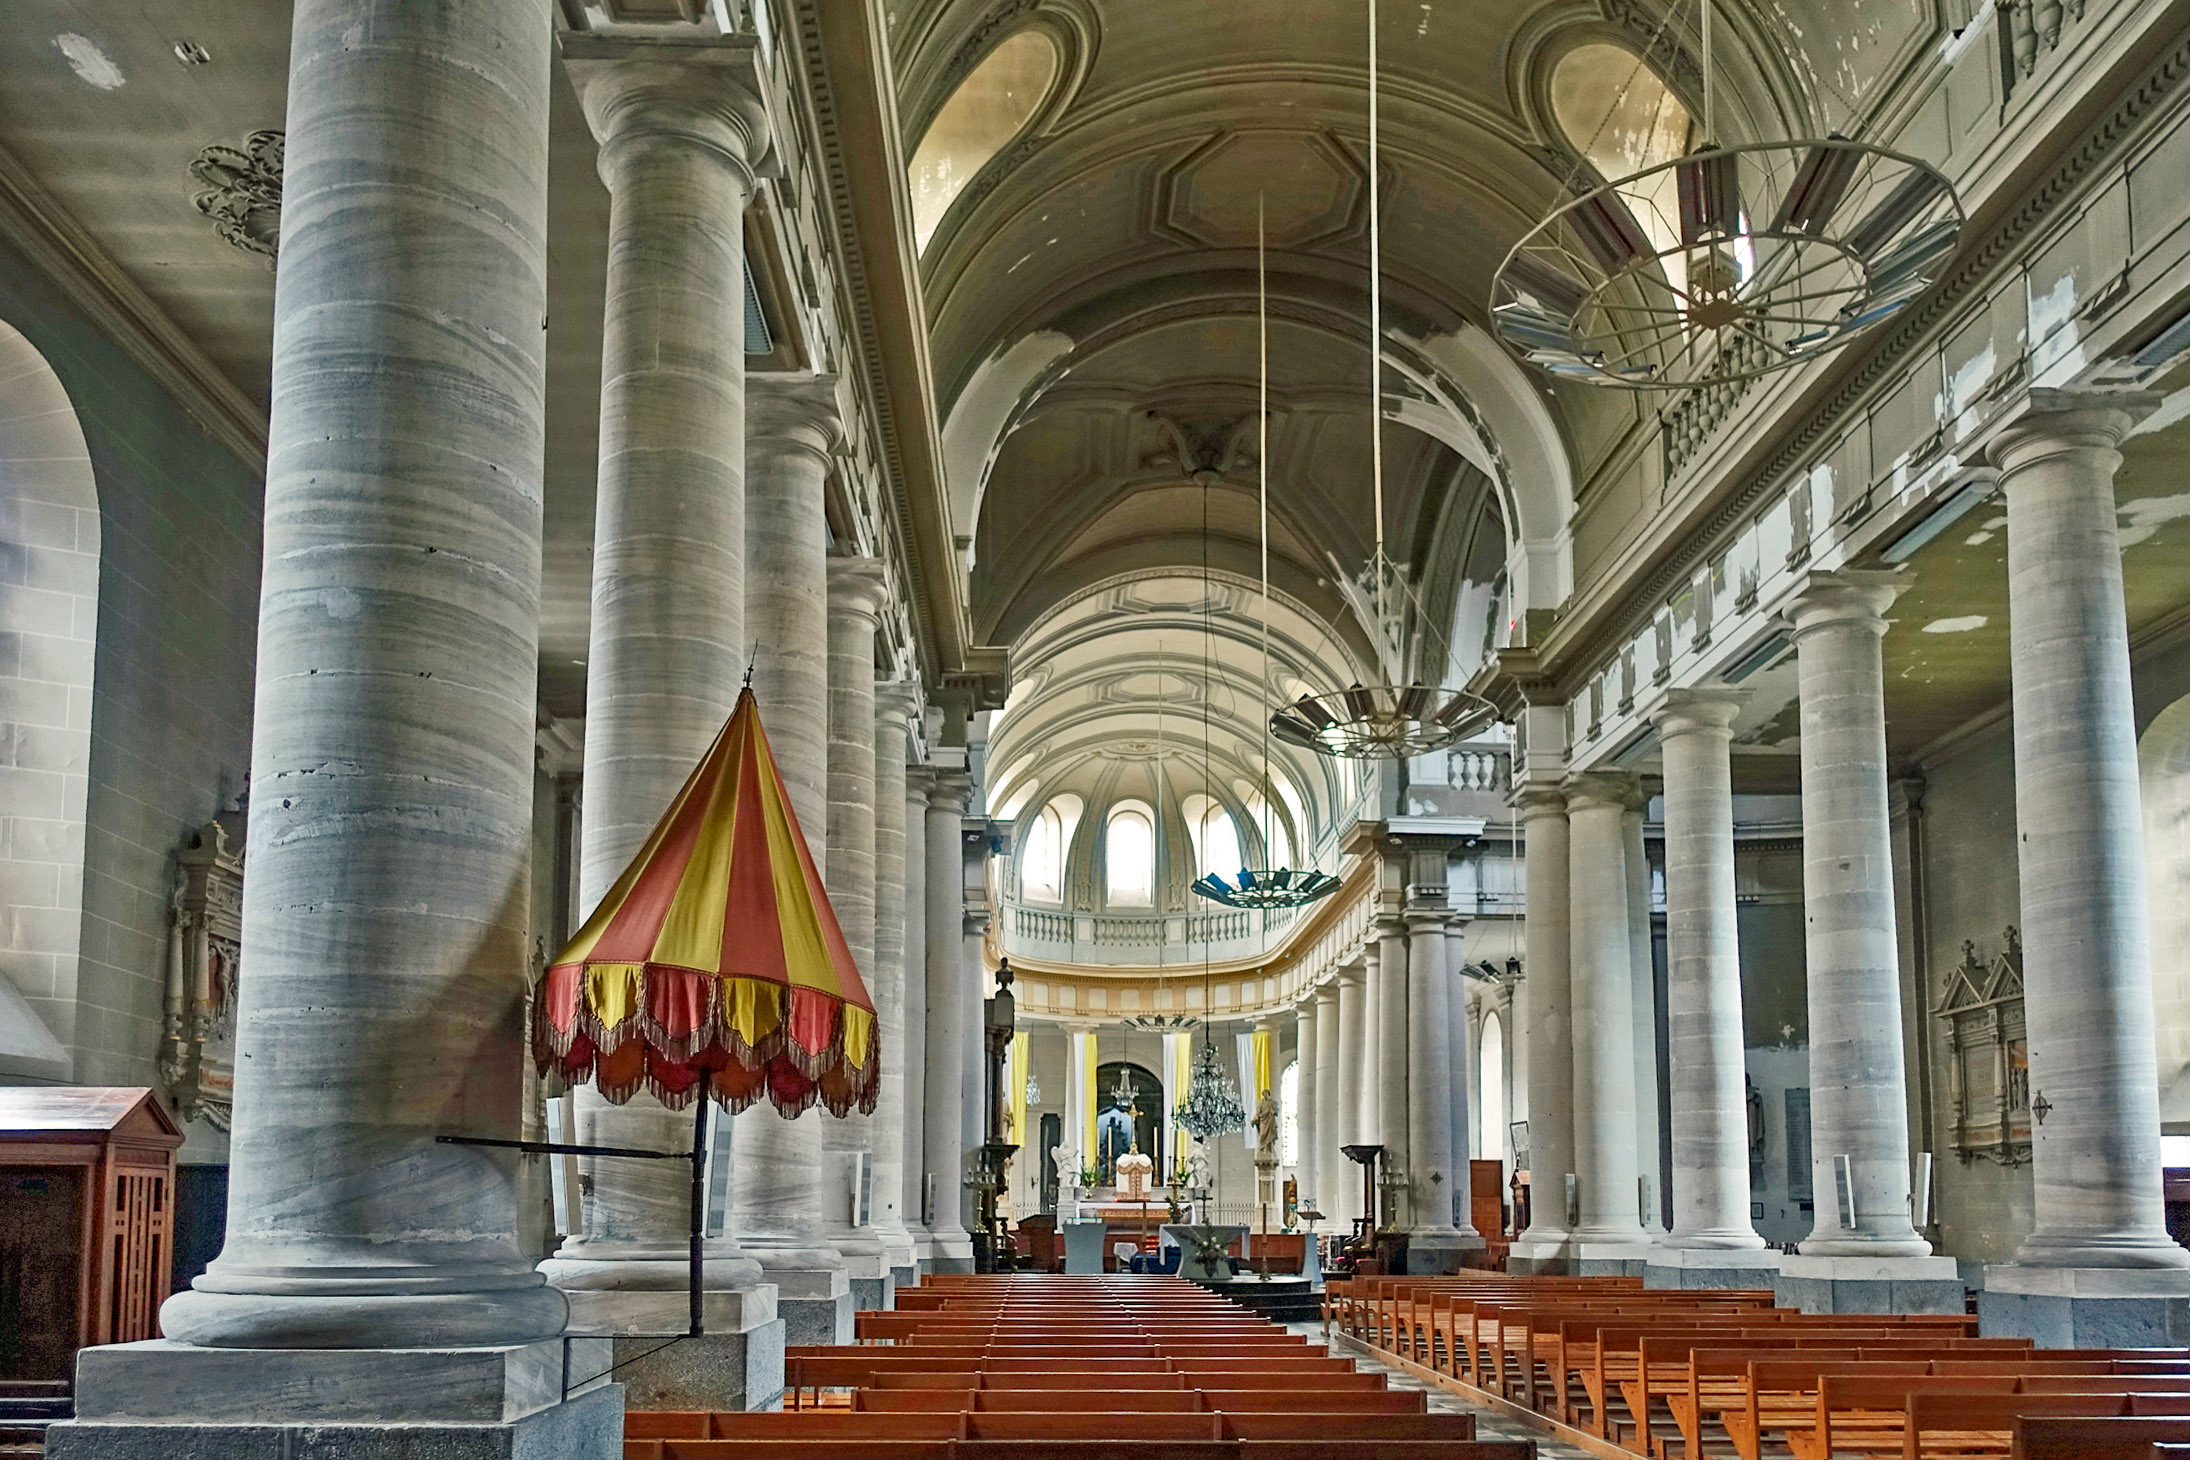 Avranches Saint-Gervais Basilica © Ptyx - licence [CC BY-SA 4.0] from Wikimedia Commons